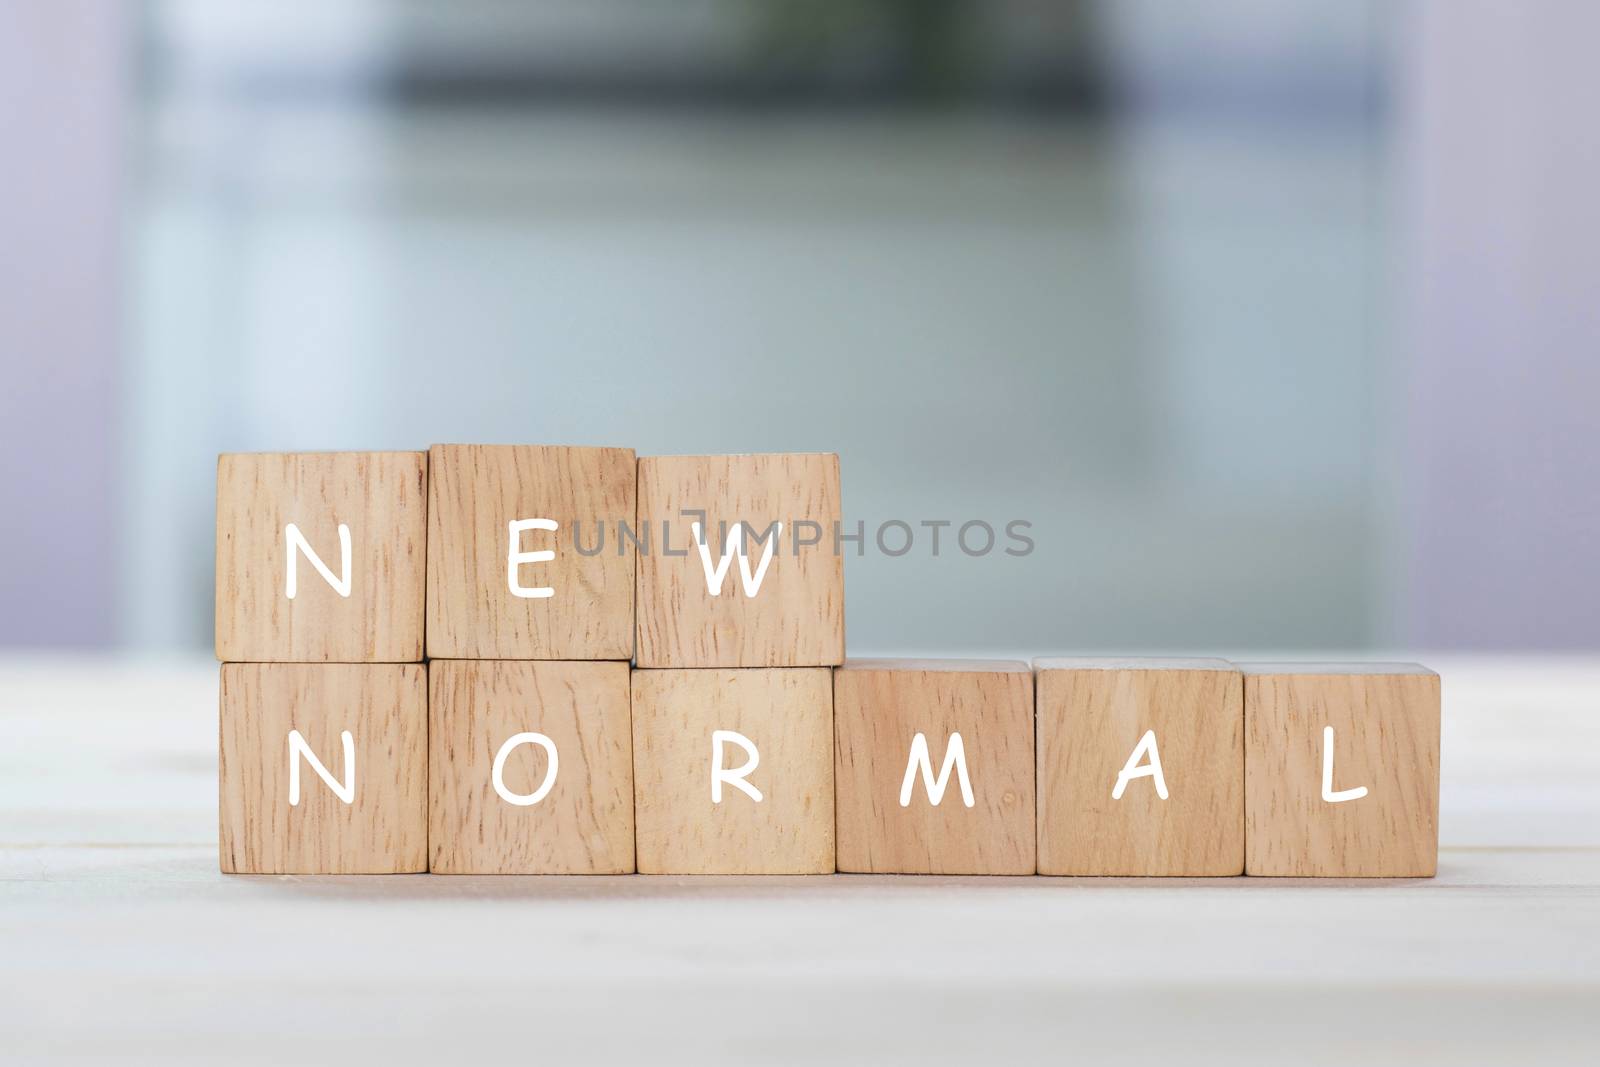 New normal on wooden cube with blurred background. by Eungsuwat